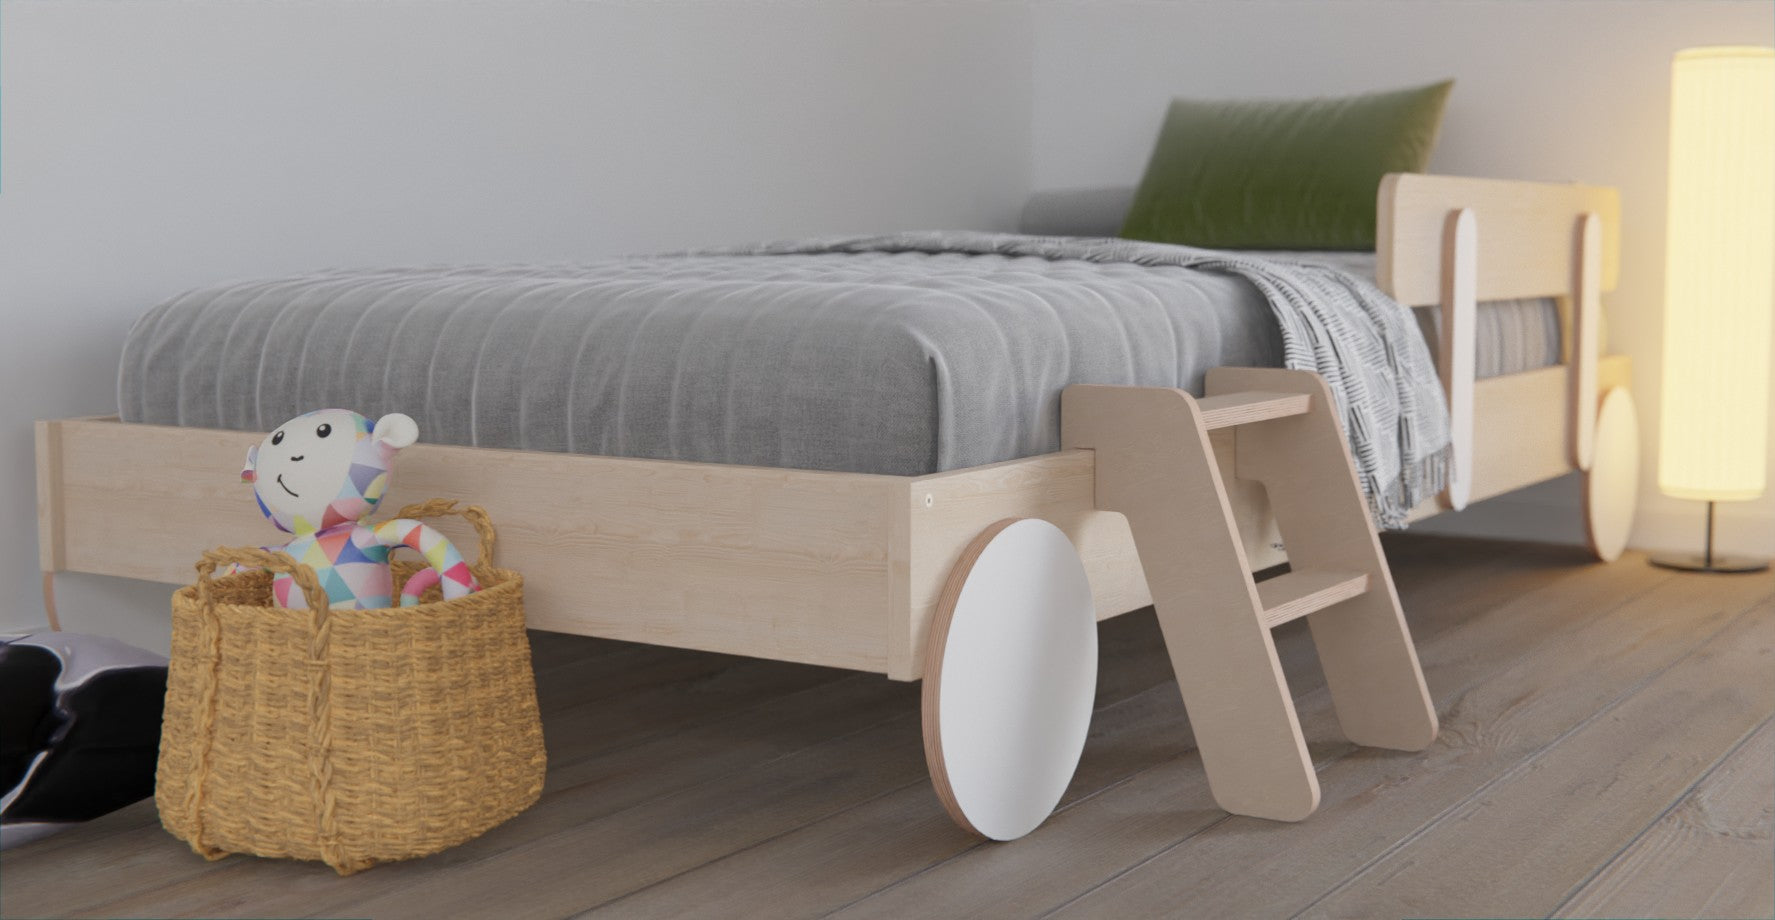 Montessori floor bed frame made from NZ pine: Safe, durable, and perfect for kids. Auckland free delivery.